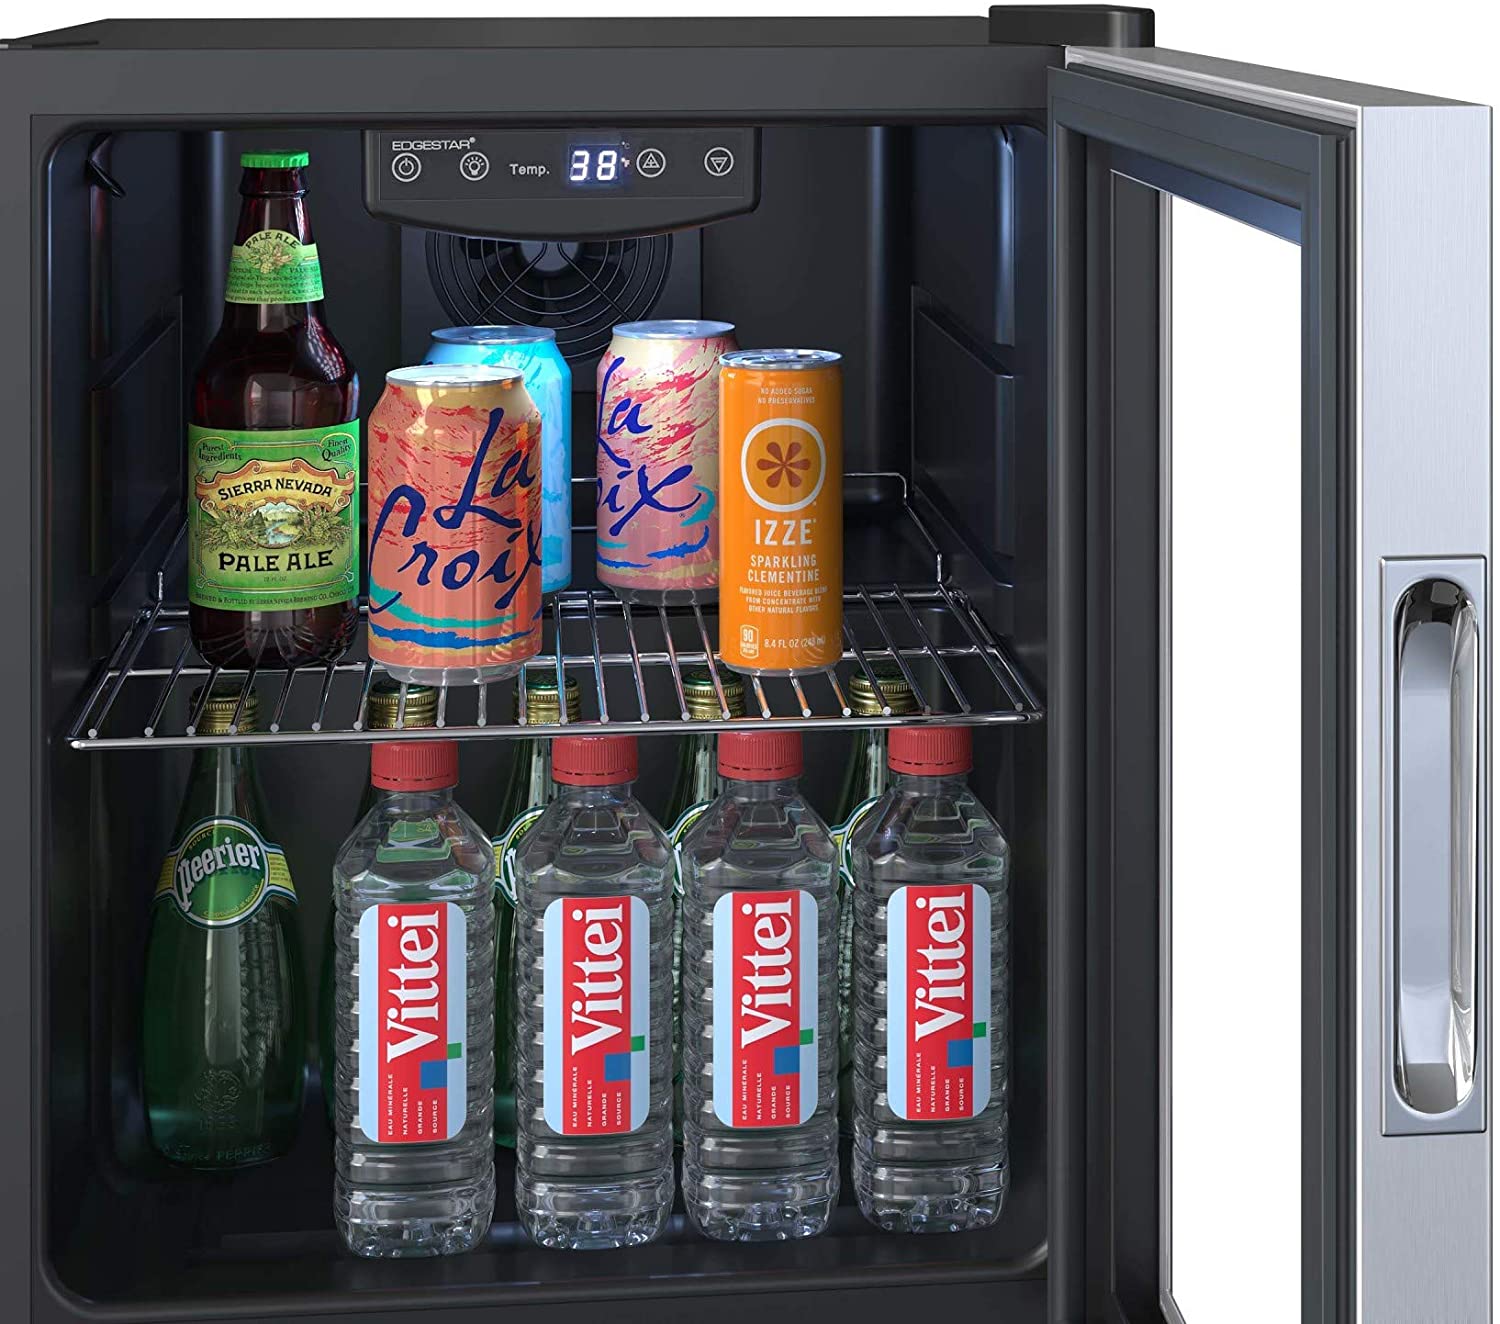 10 Best Countertop Refrigerator 2022 Review: Single Door Mini Fridge with Small Freezer Space for Bedroom/ Kitchen/ Office All In One Cooling Gear Lab: Any Refrigerators Air Conditioners Freezers Ice Makers Coolers Fans Reviewed And Compared.